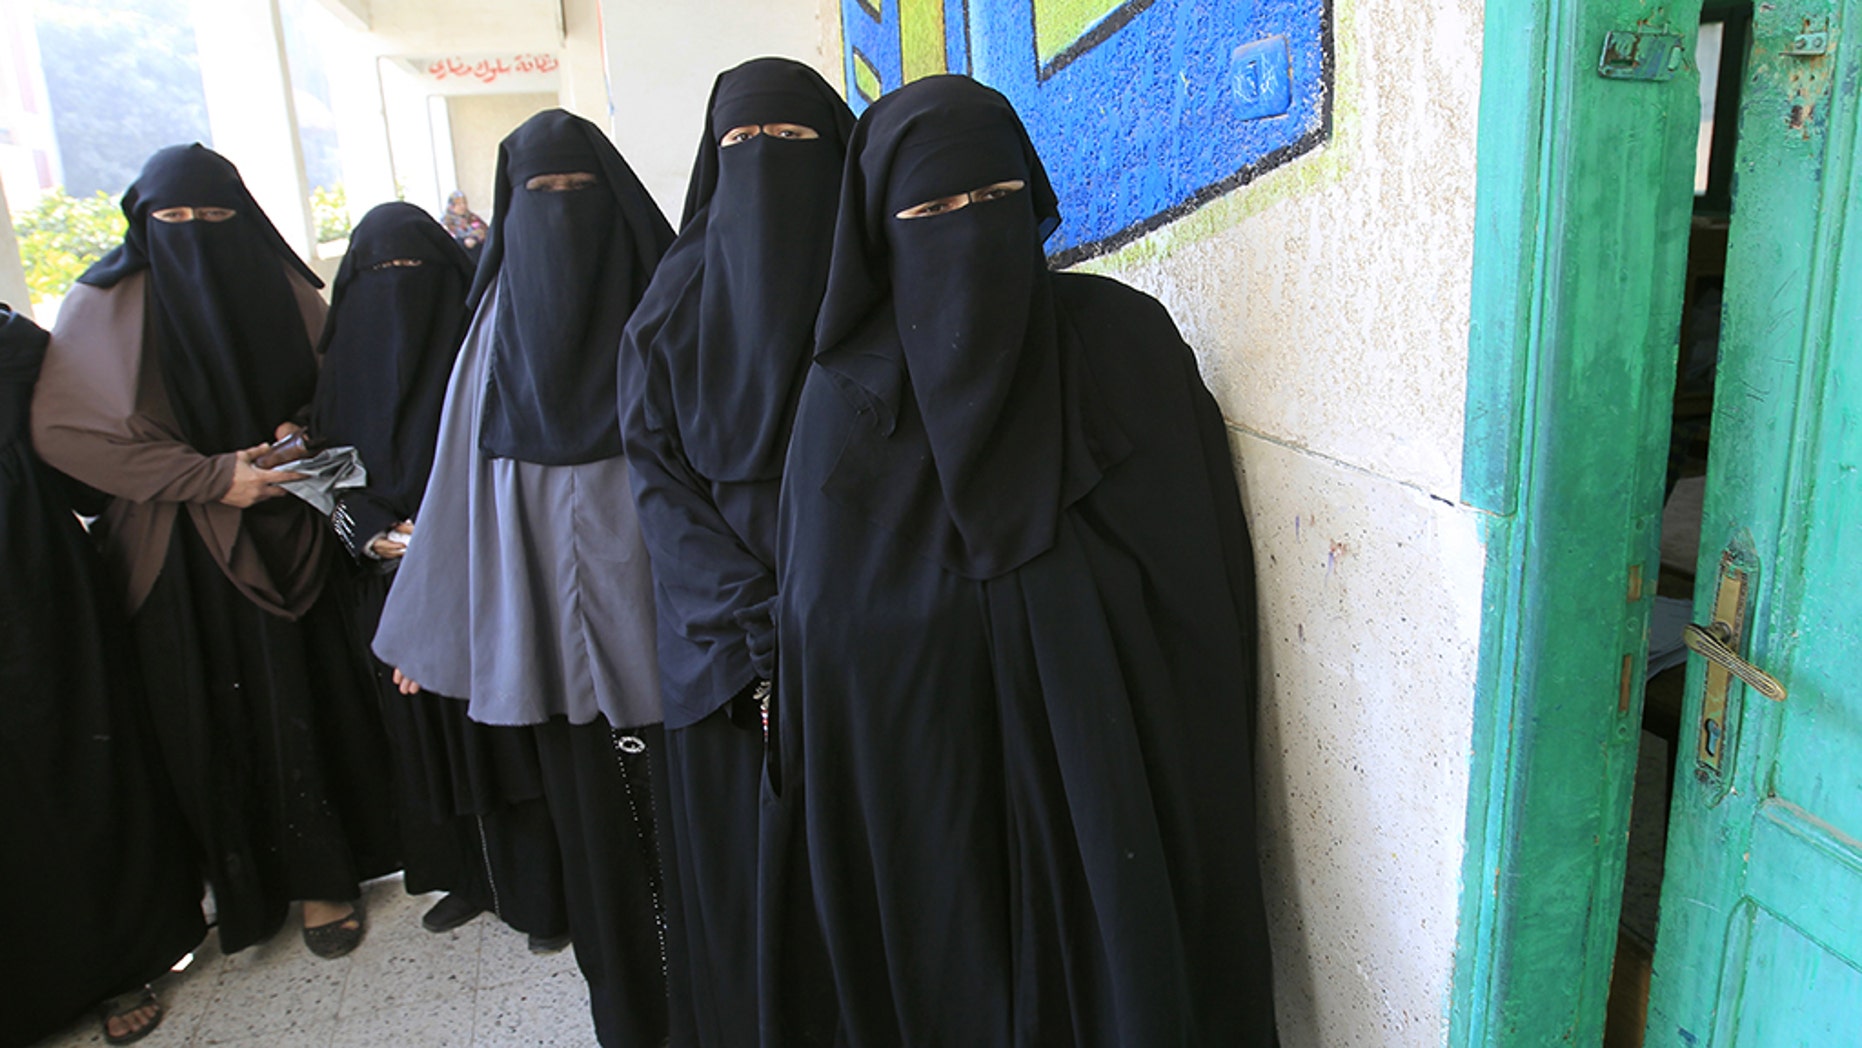 Niqab-clad Egyptian women line up to vote at a polling station in Qaliubia, north of Cairo, on January 4, 2012